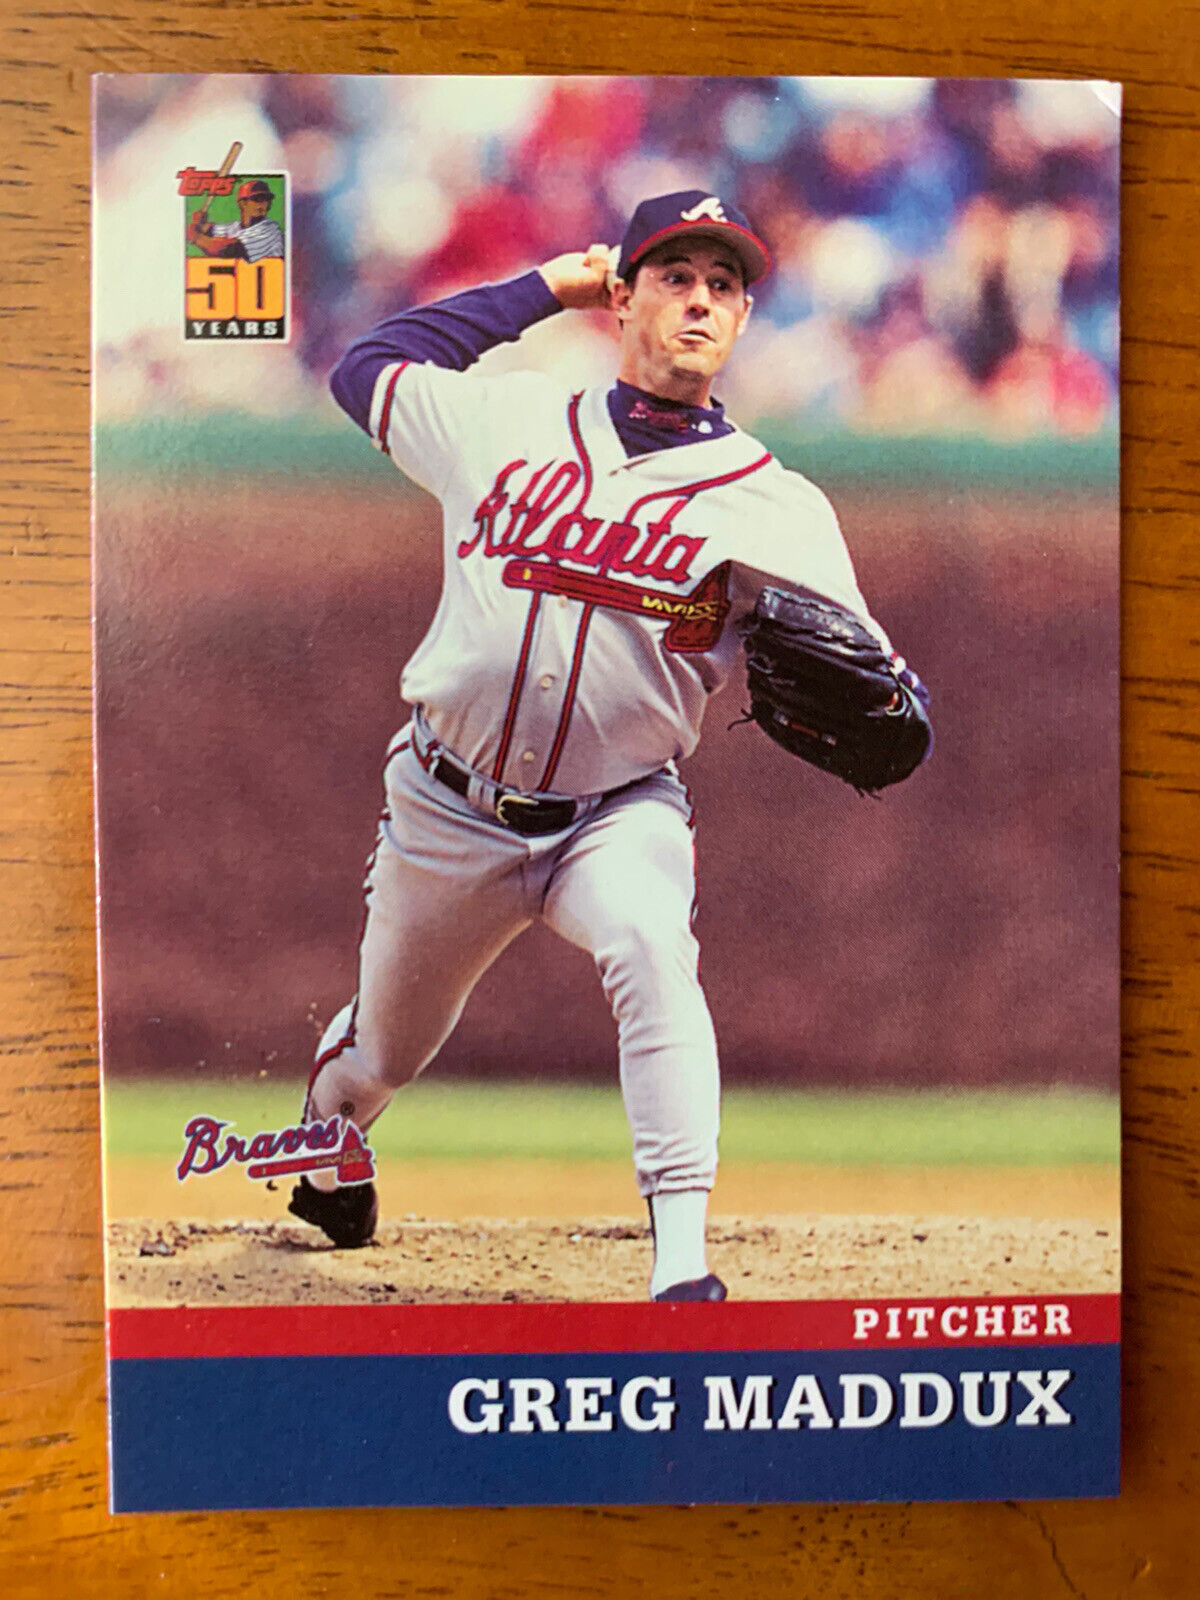 2001 Topps 50 Years Postopia Card #5 Of 18 Pitcher Greg Maddux